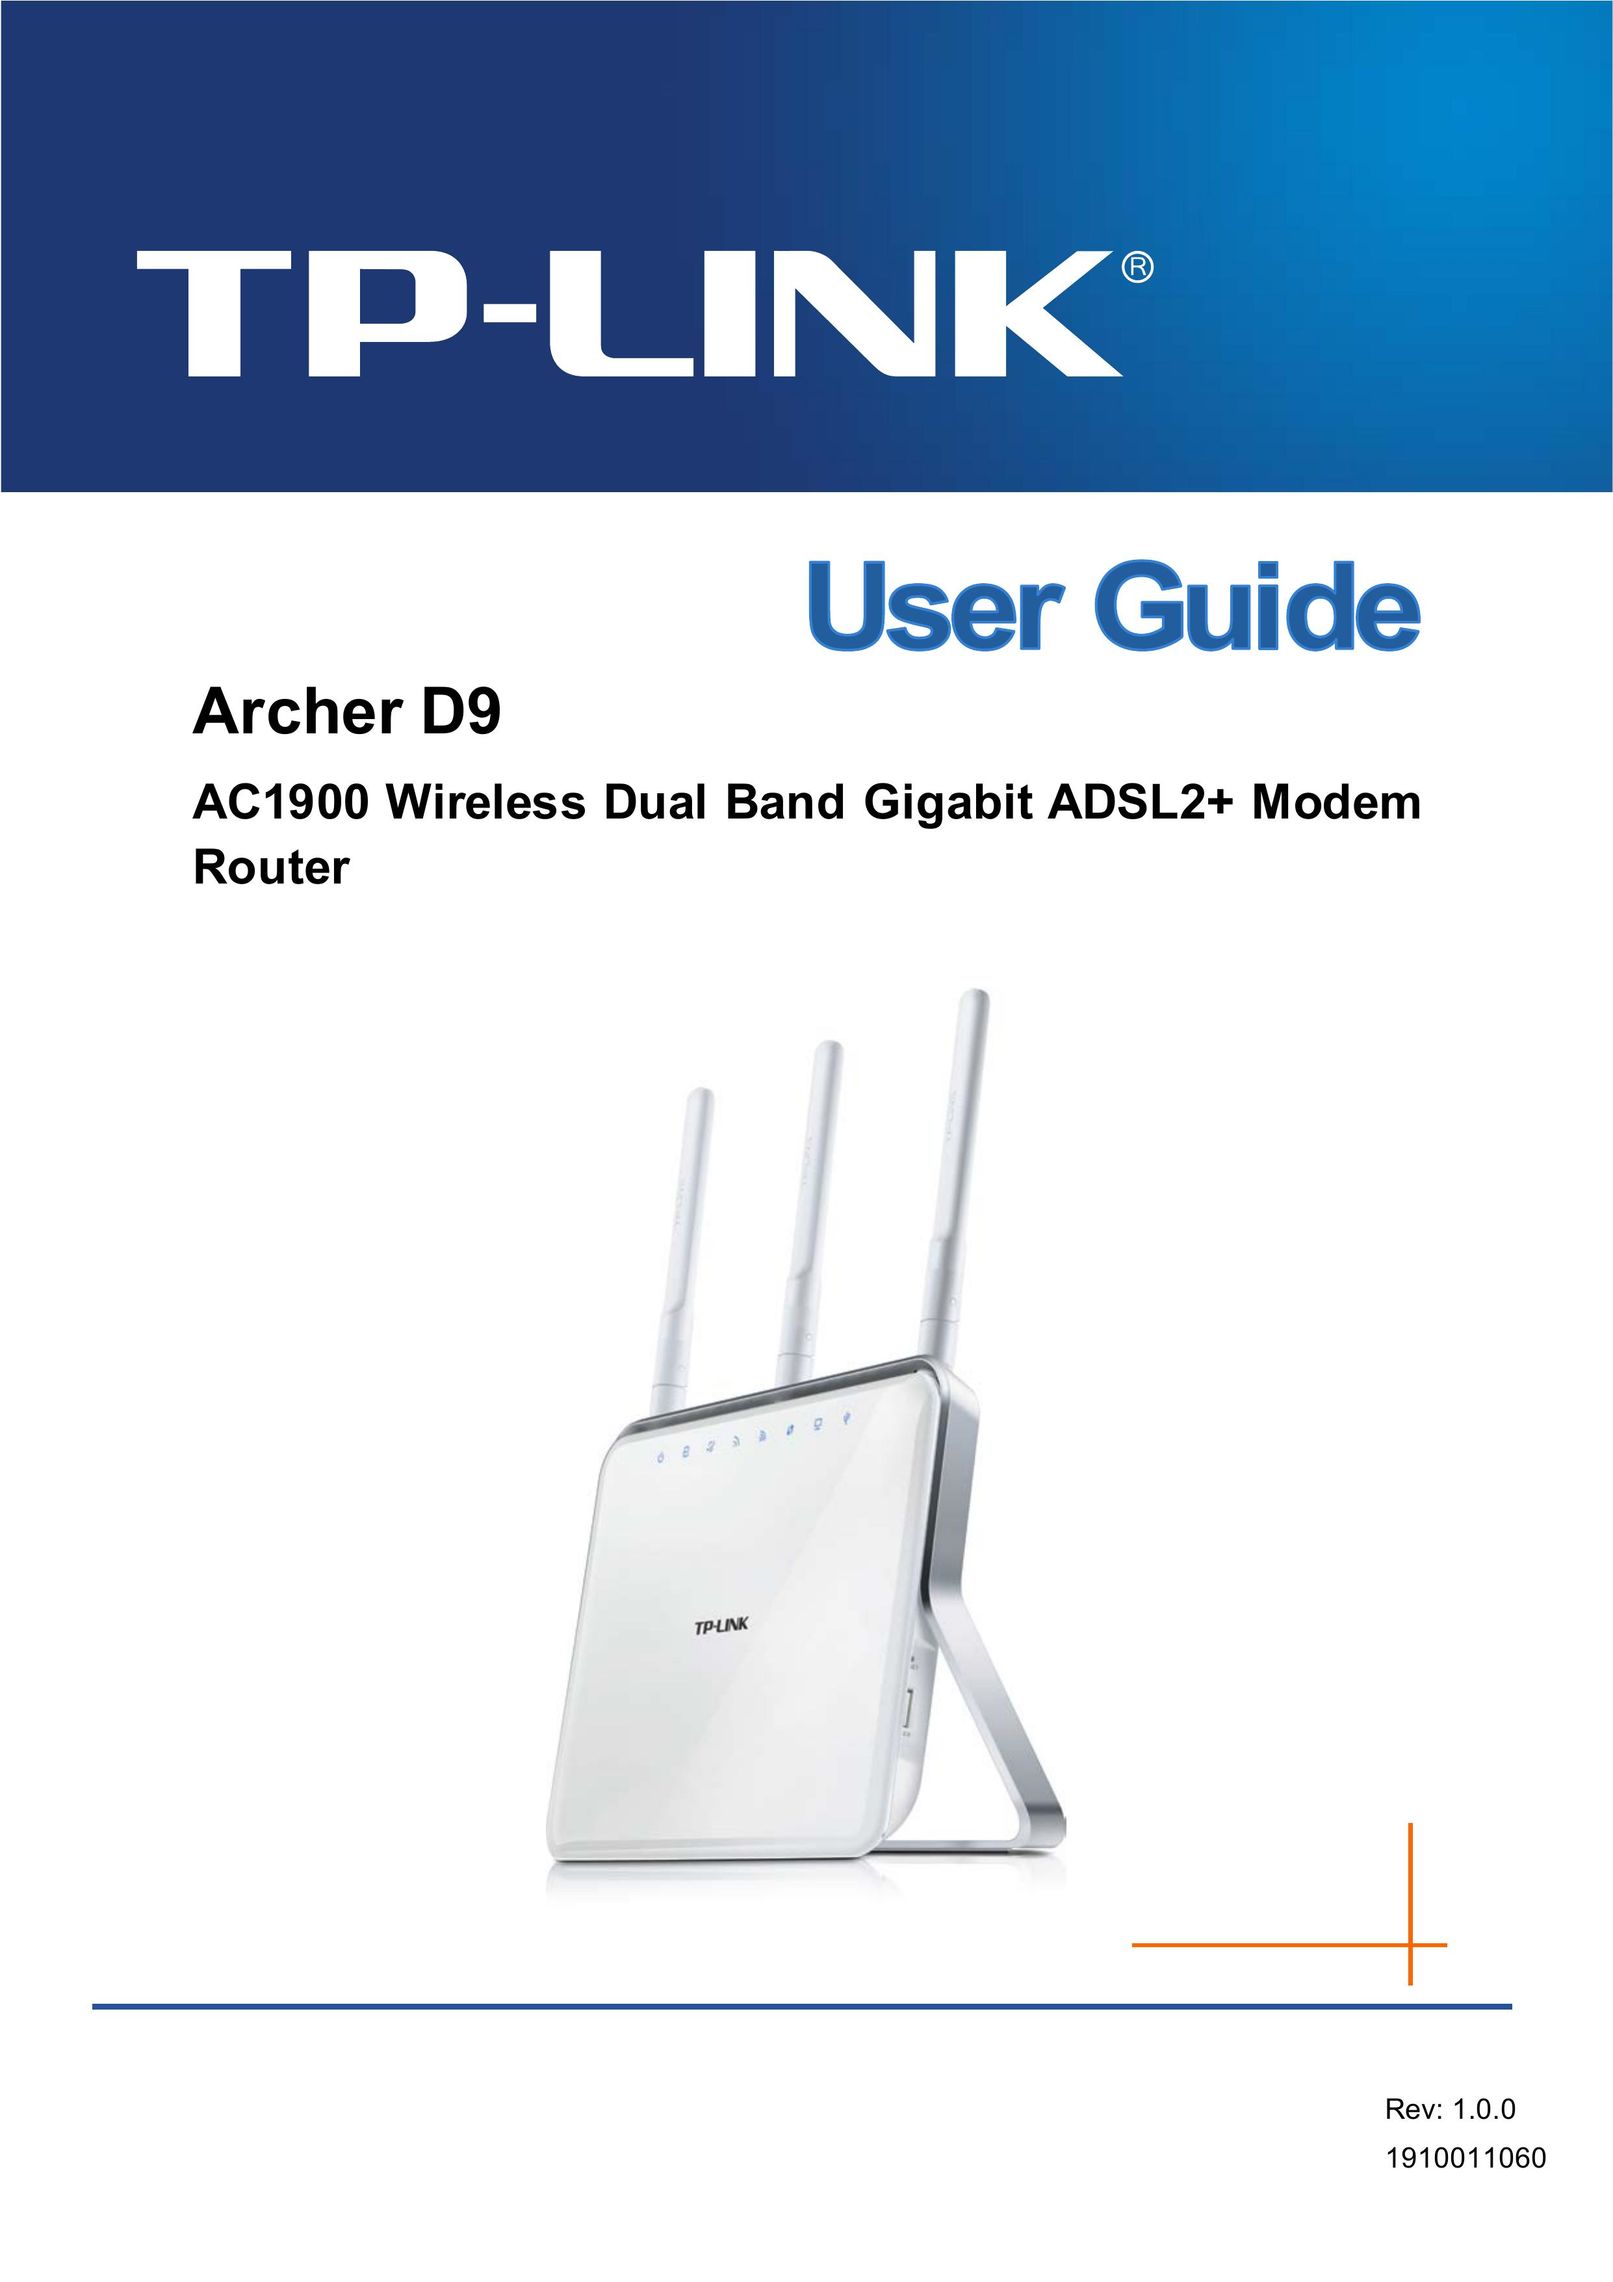 TP-Link d9 Network Router User Manual